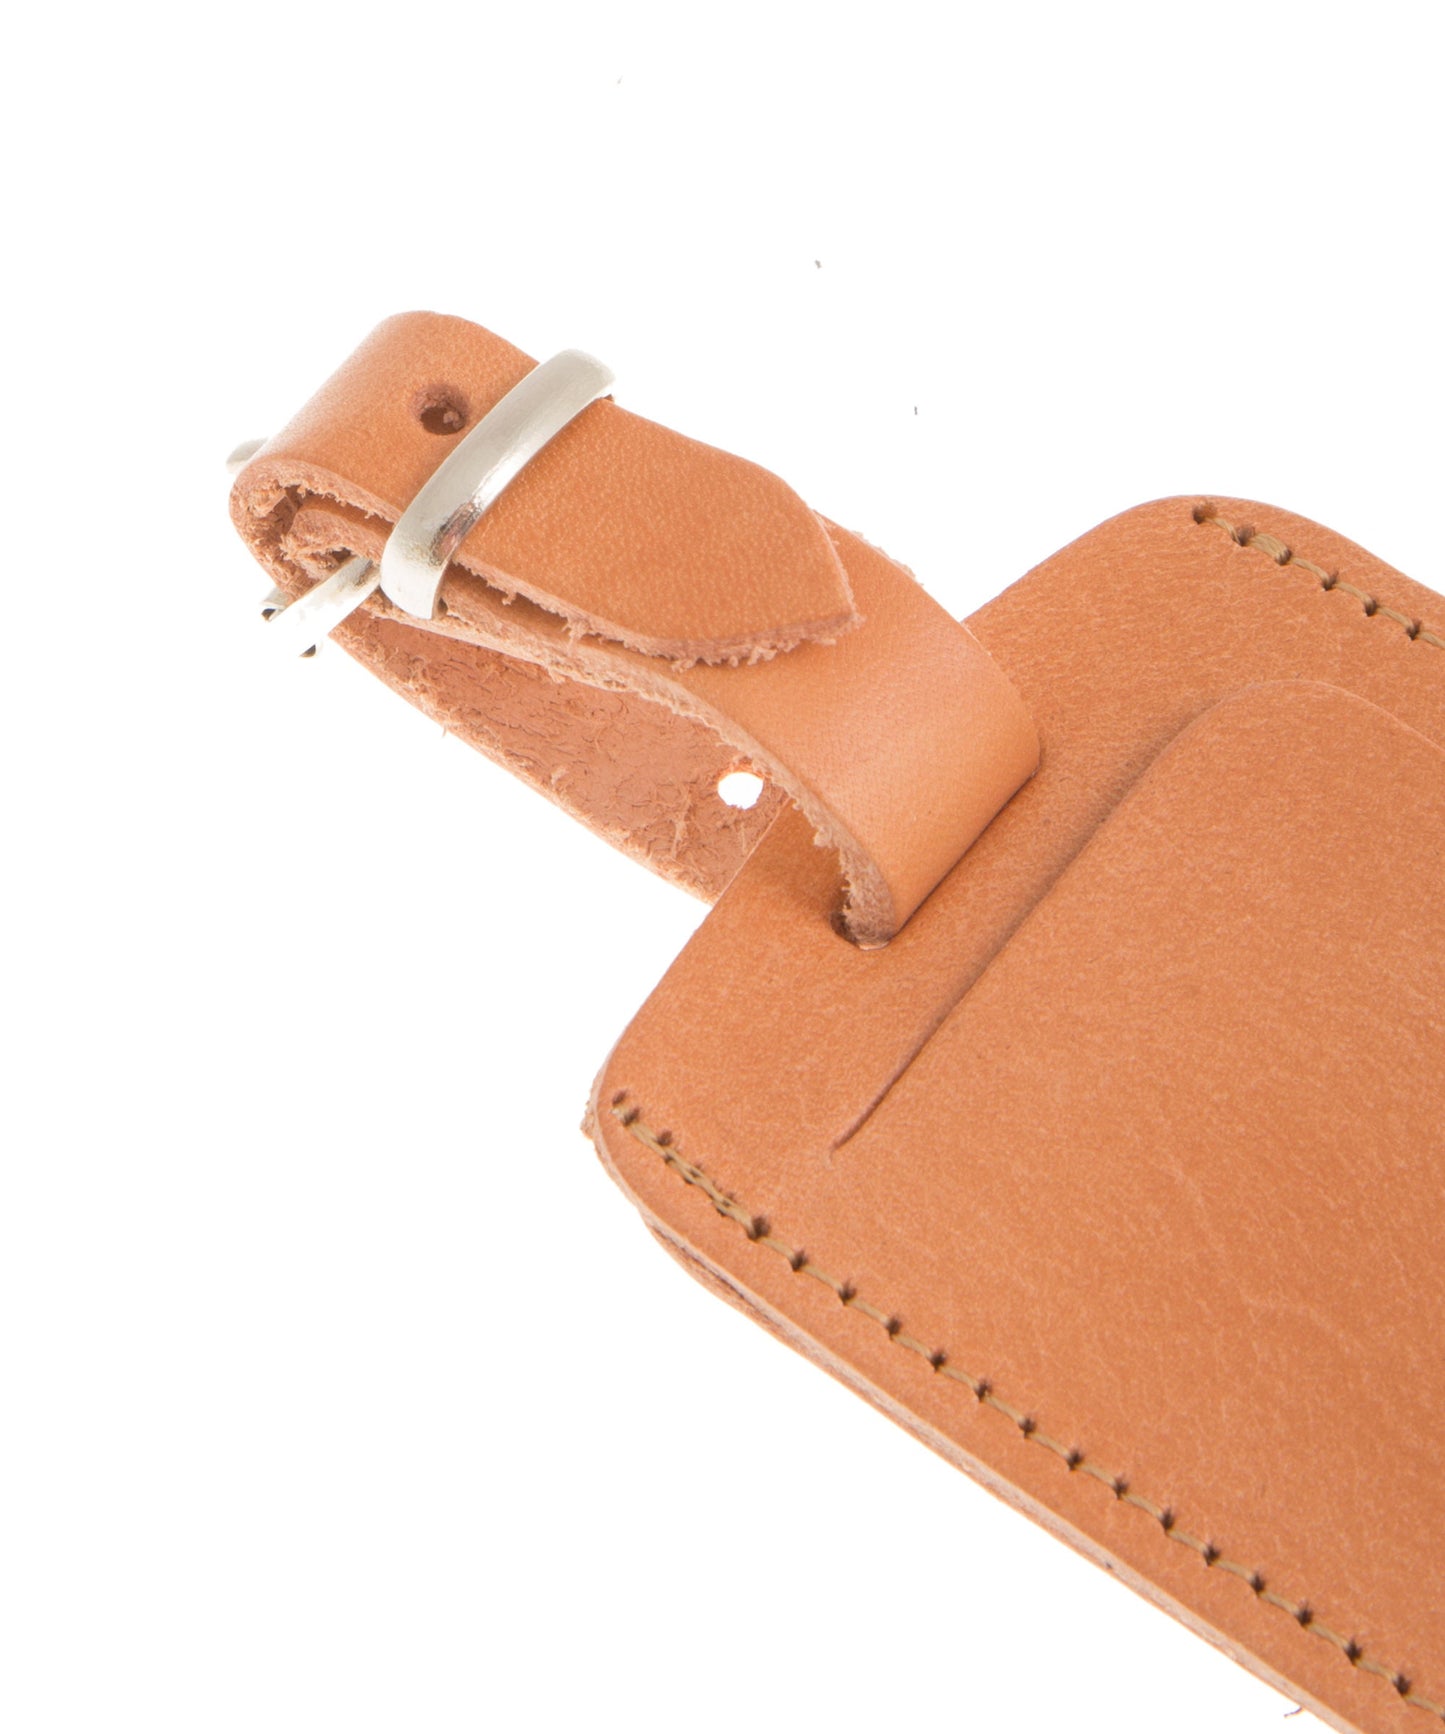 Natural leather luggage tag, Baggage label name, Unique suitcase tag, Bespoke luggage tag